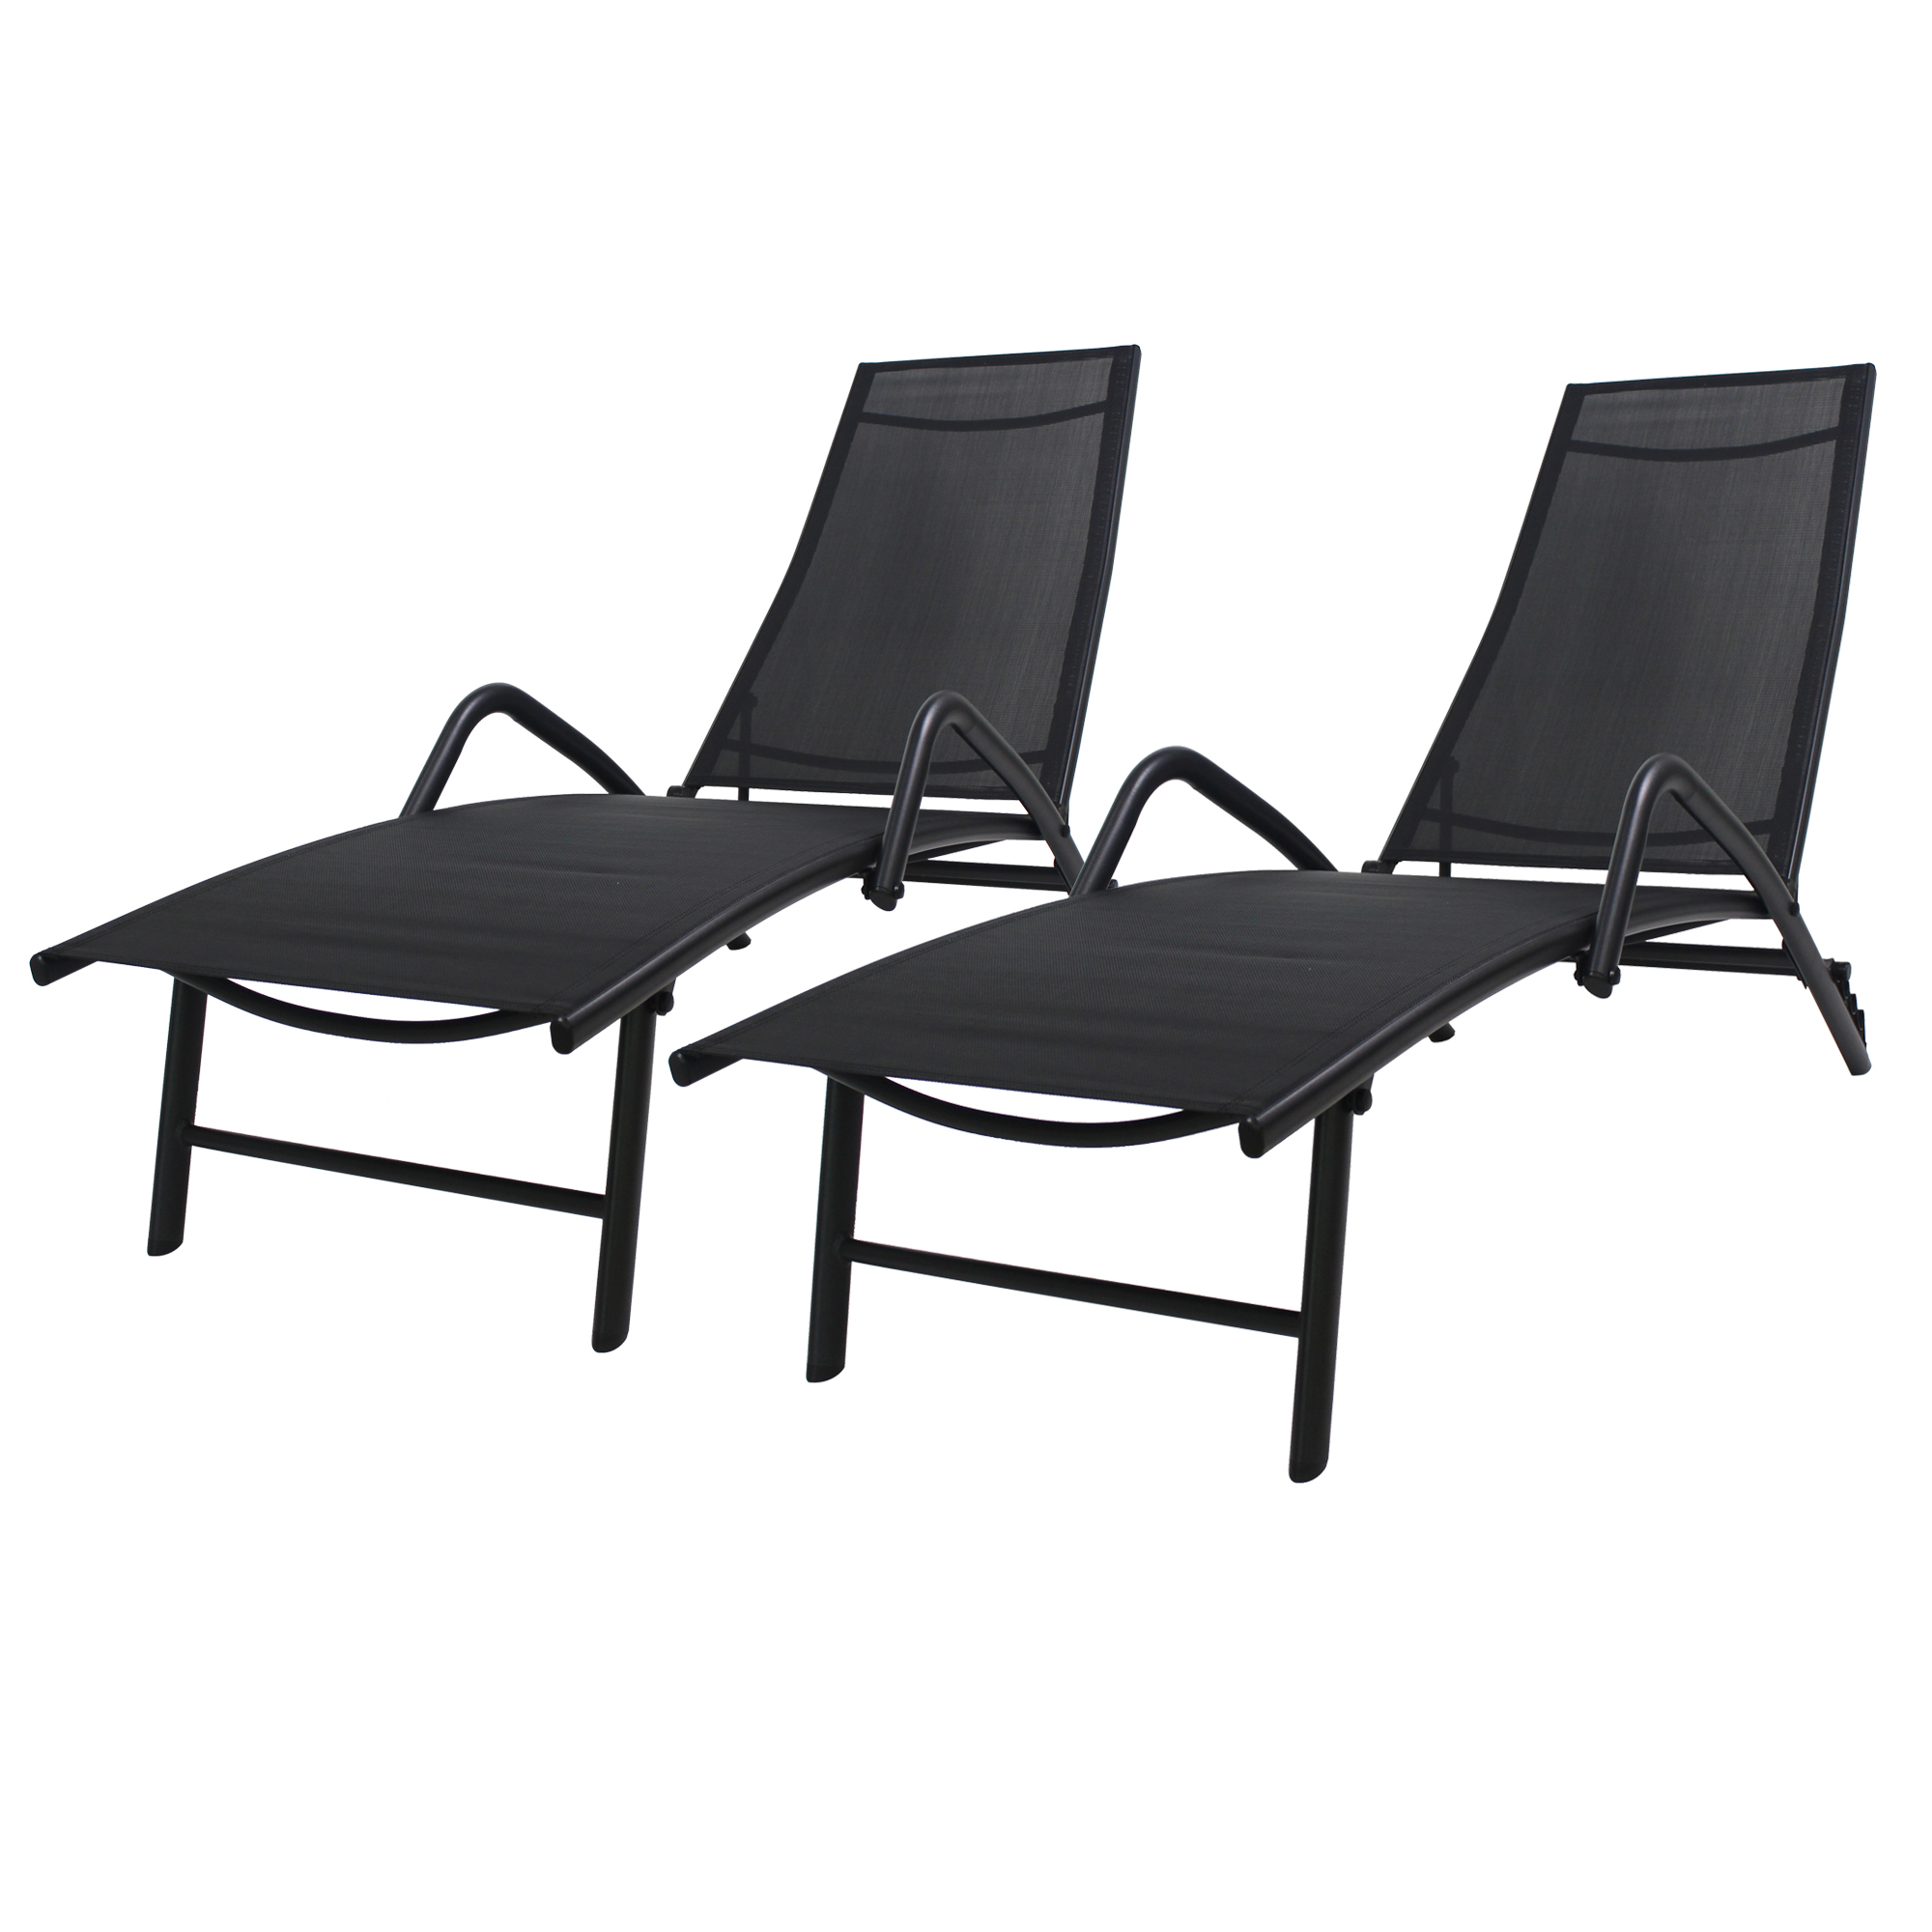 2 Piece Pool Lounge Chairs, Patio Furniture Patio Chaise Lounge Chair with Adjustable Back, Metal Reclining Lounge Chair for Beach, Backyard, Garden, L4553 - image 2 of 8